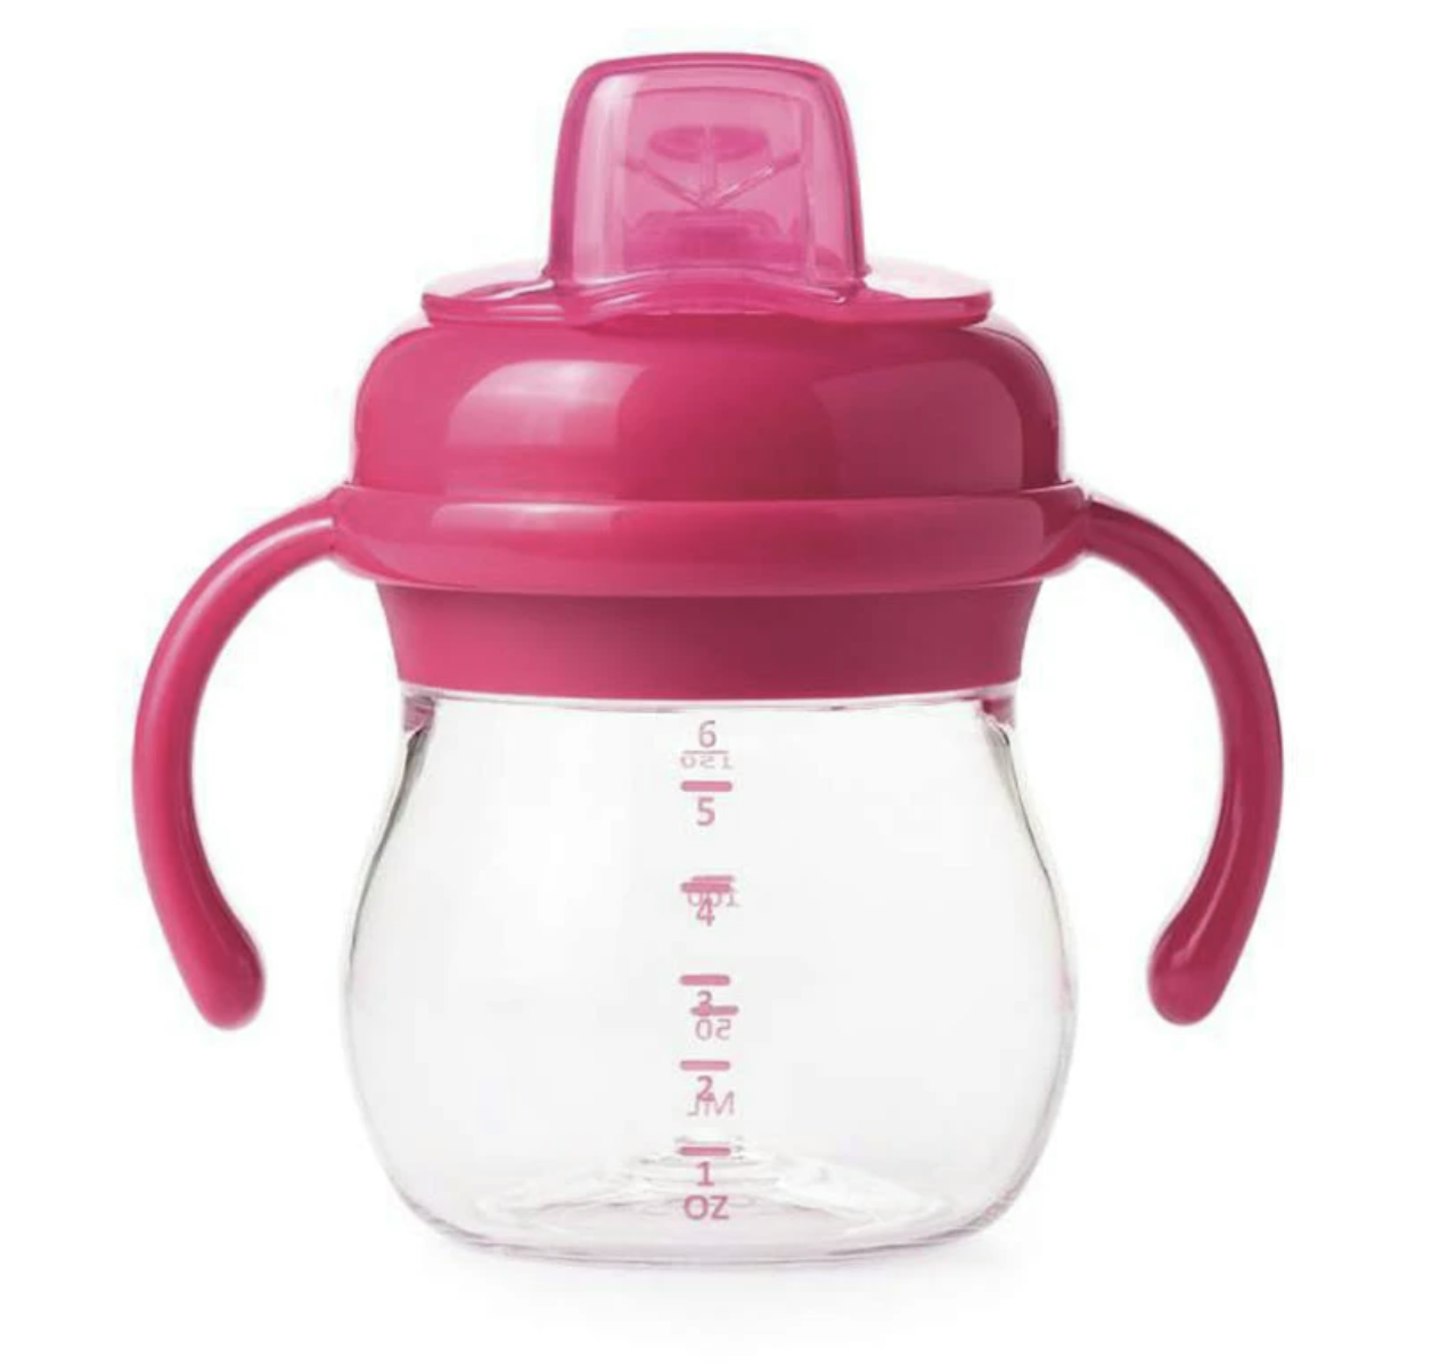 The best sippy cup with removable handles: OXO Tot Soft Spout Sippy Cup